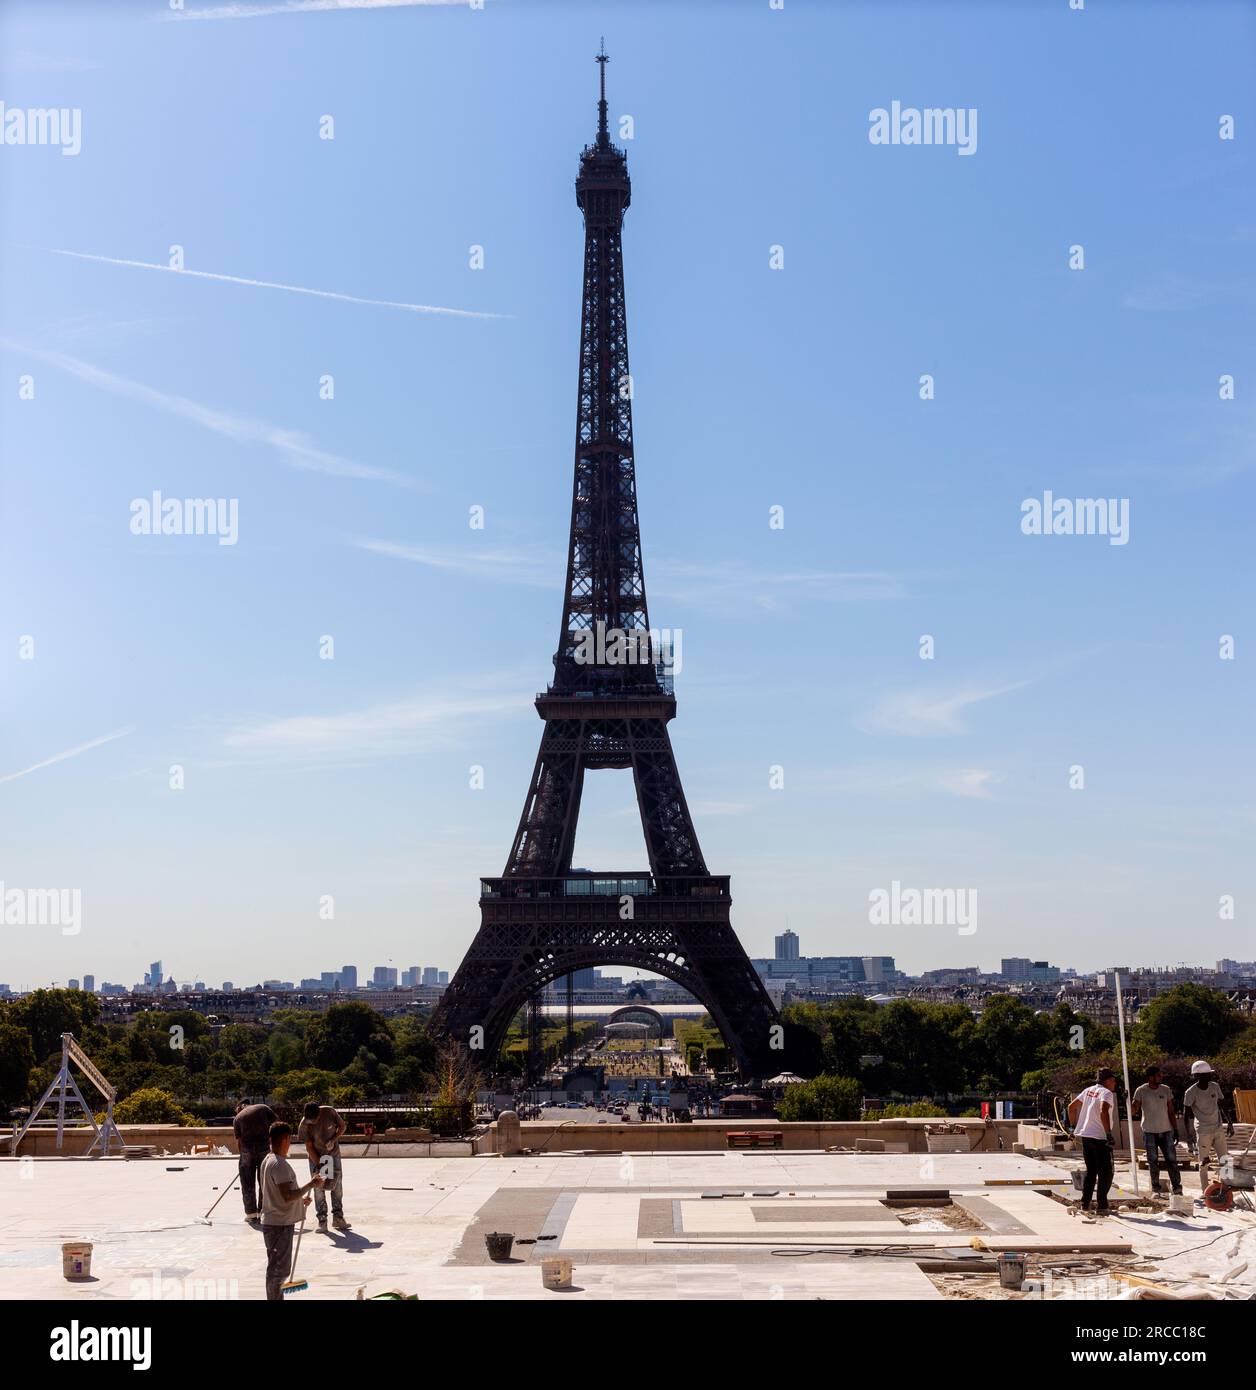 Paris, France - July 16, 2022: Construction worker in the Trocadero site with Eiffel tower on the background, Paris. France Stock Photo